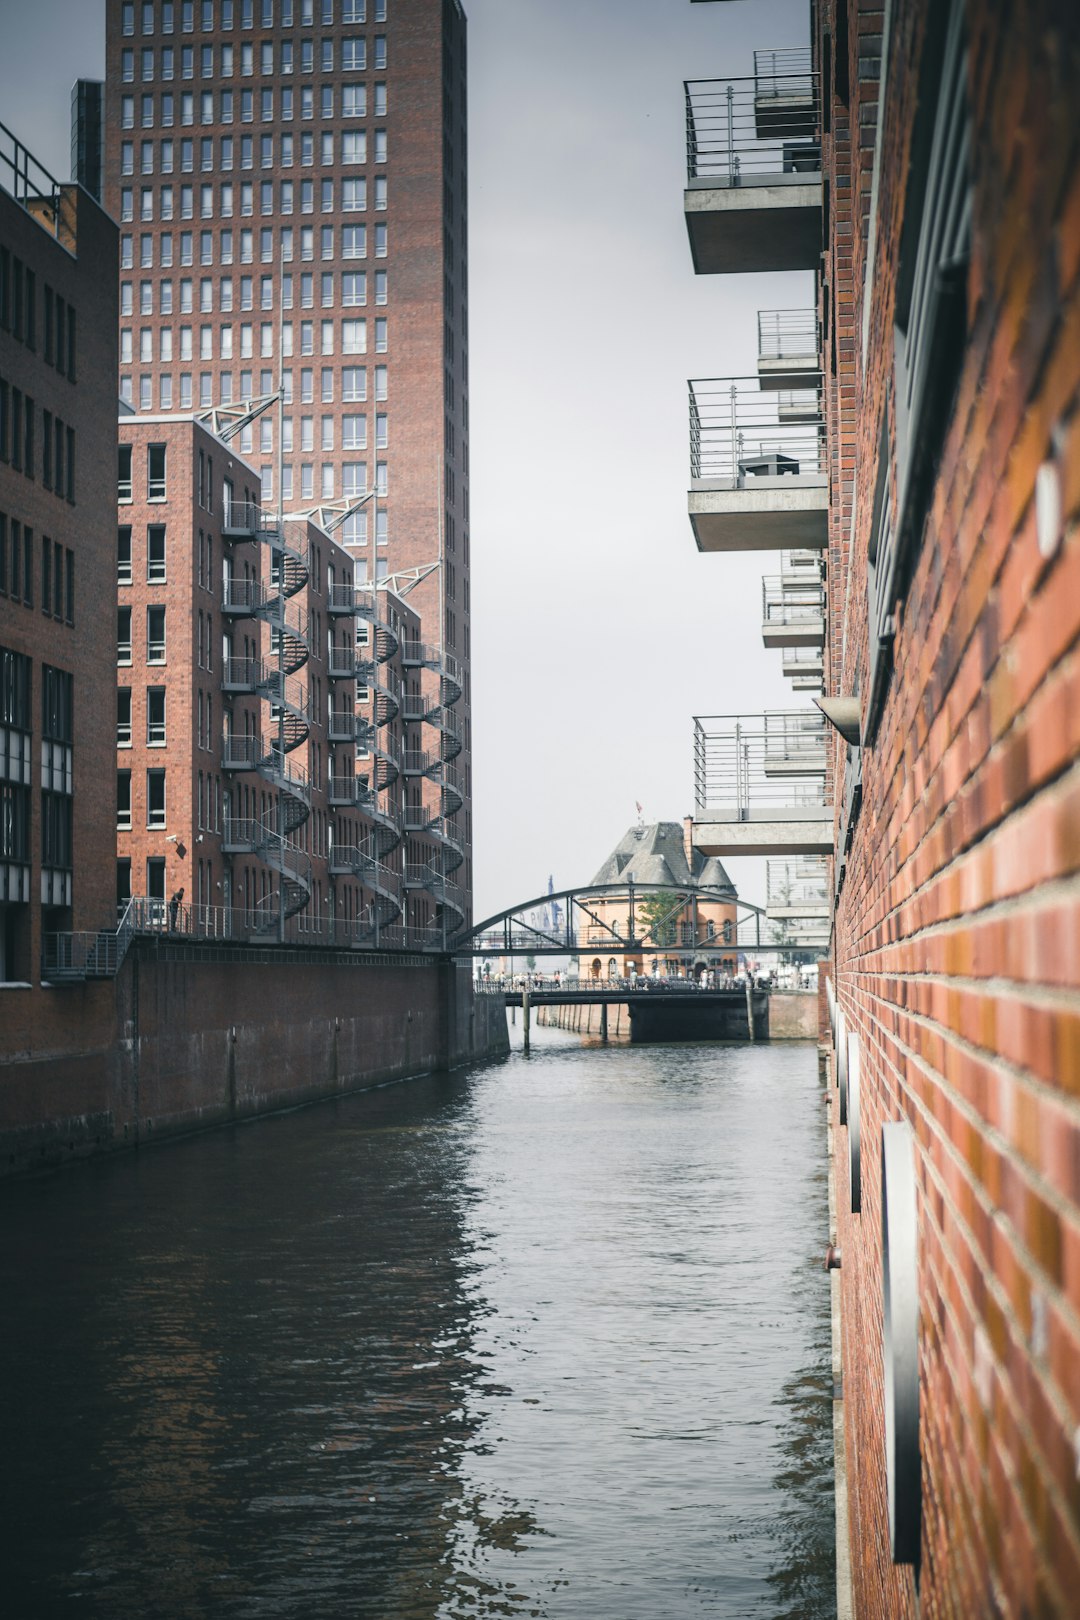 travelers stories about Town in Speicherstadt, Germany